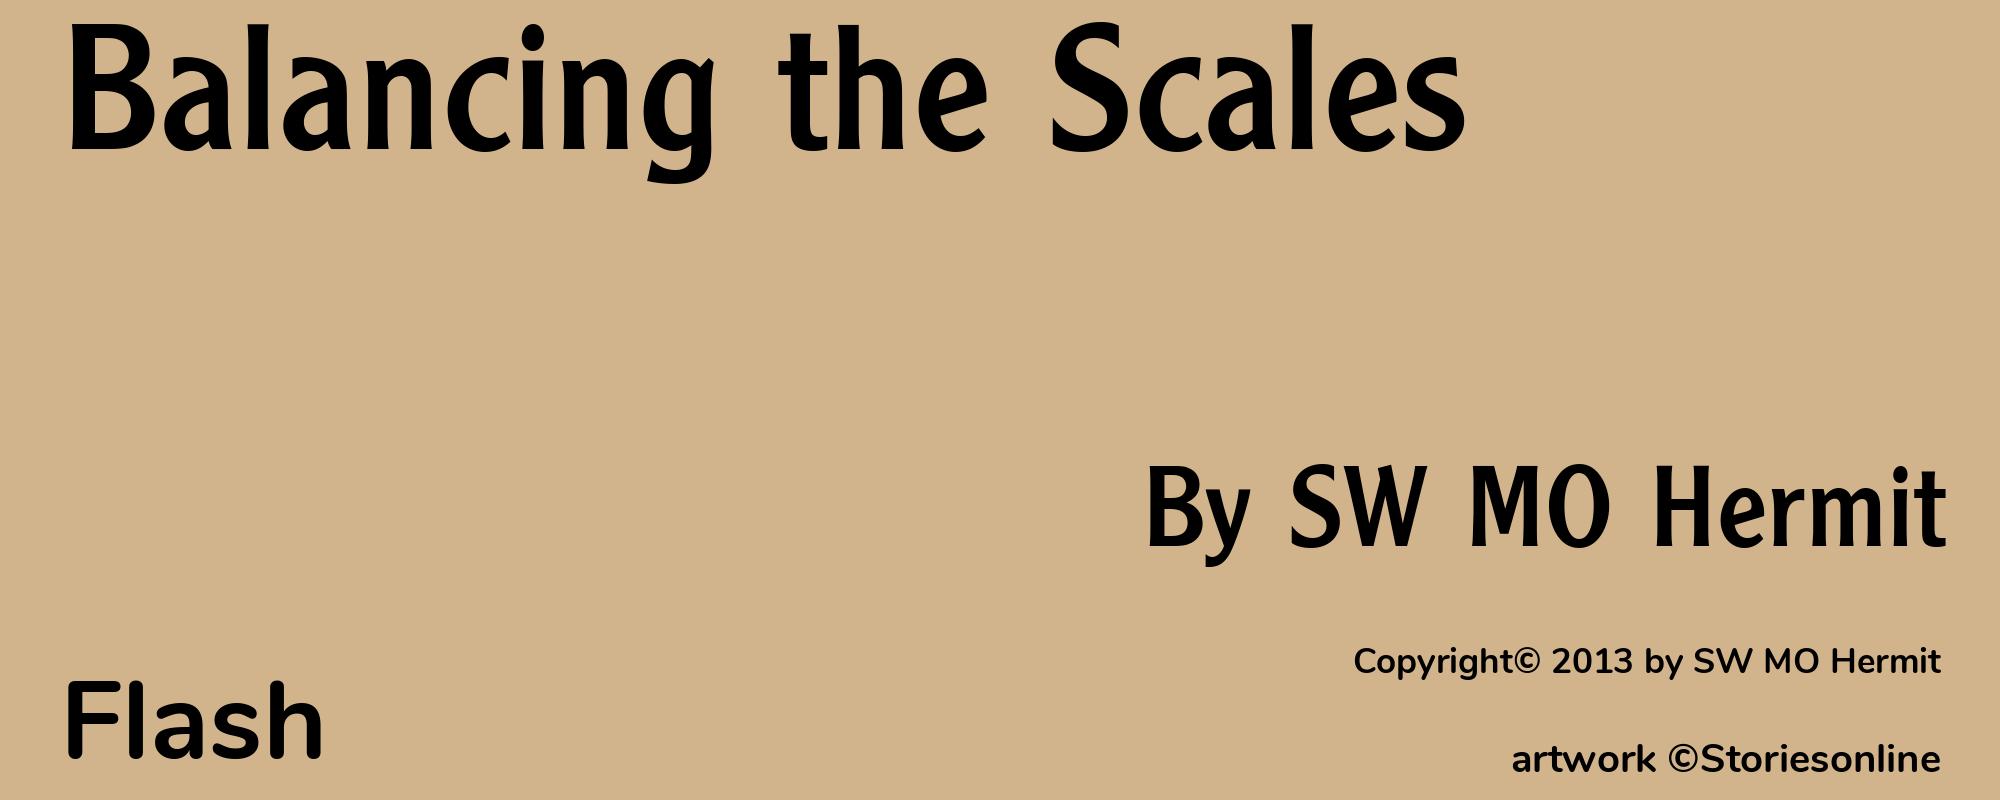 Balancing the Scales - Cover